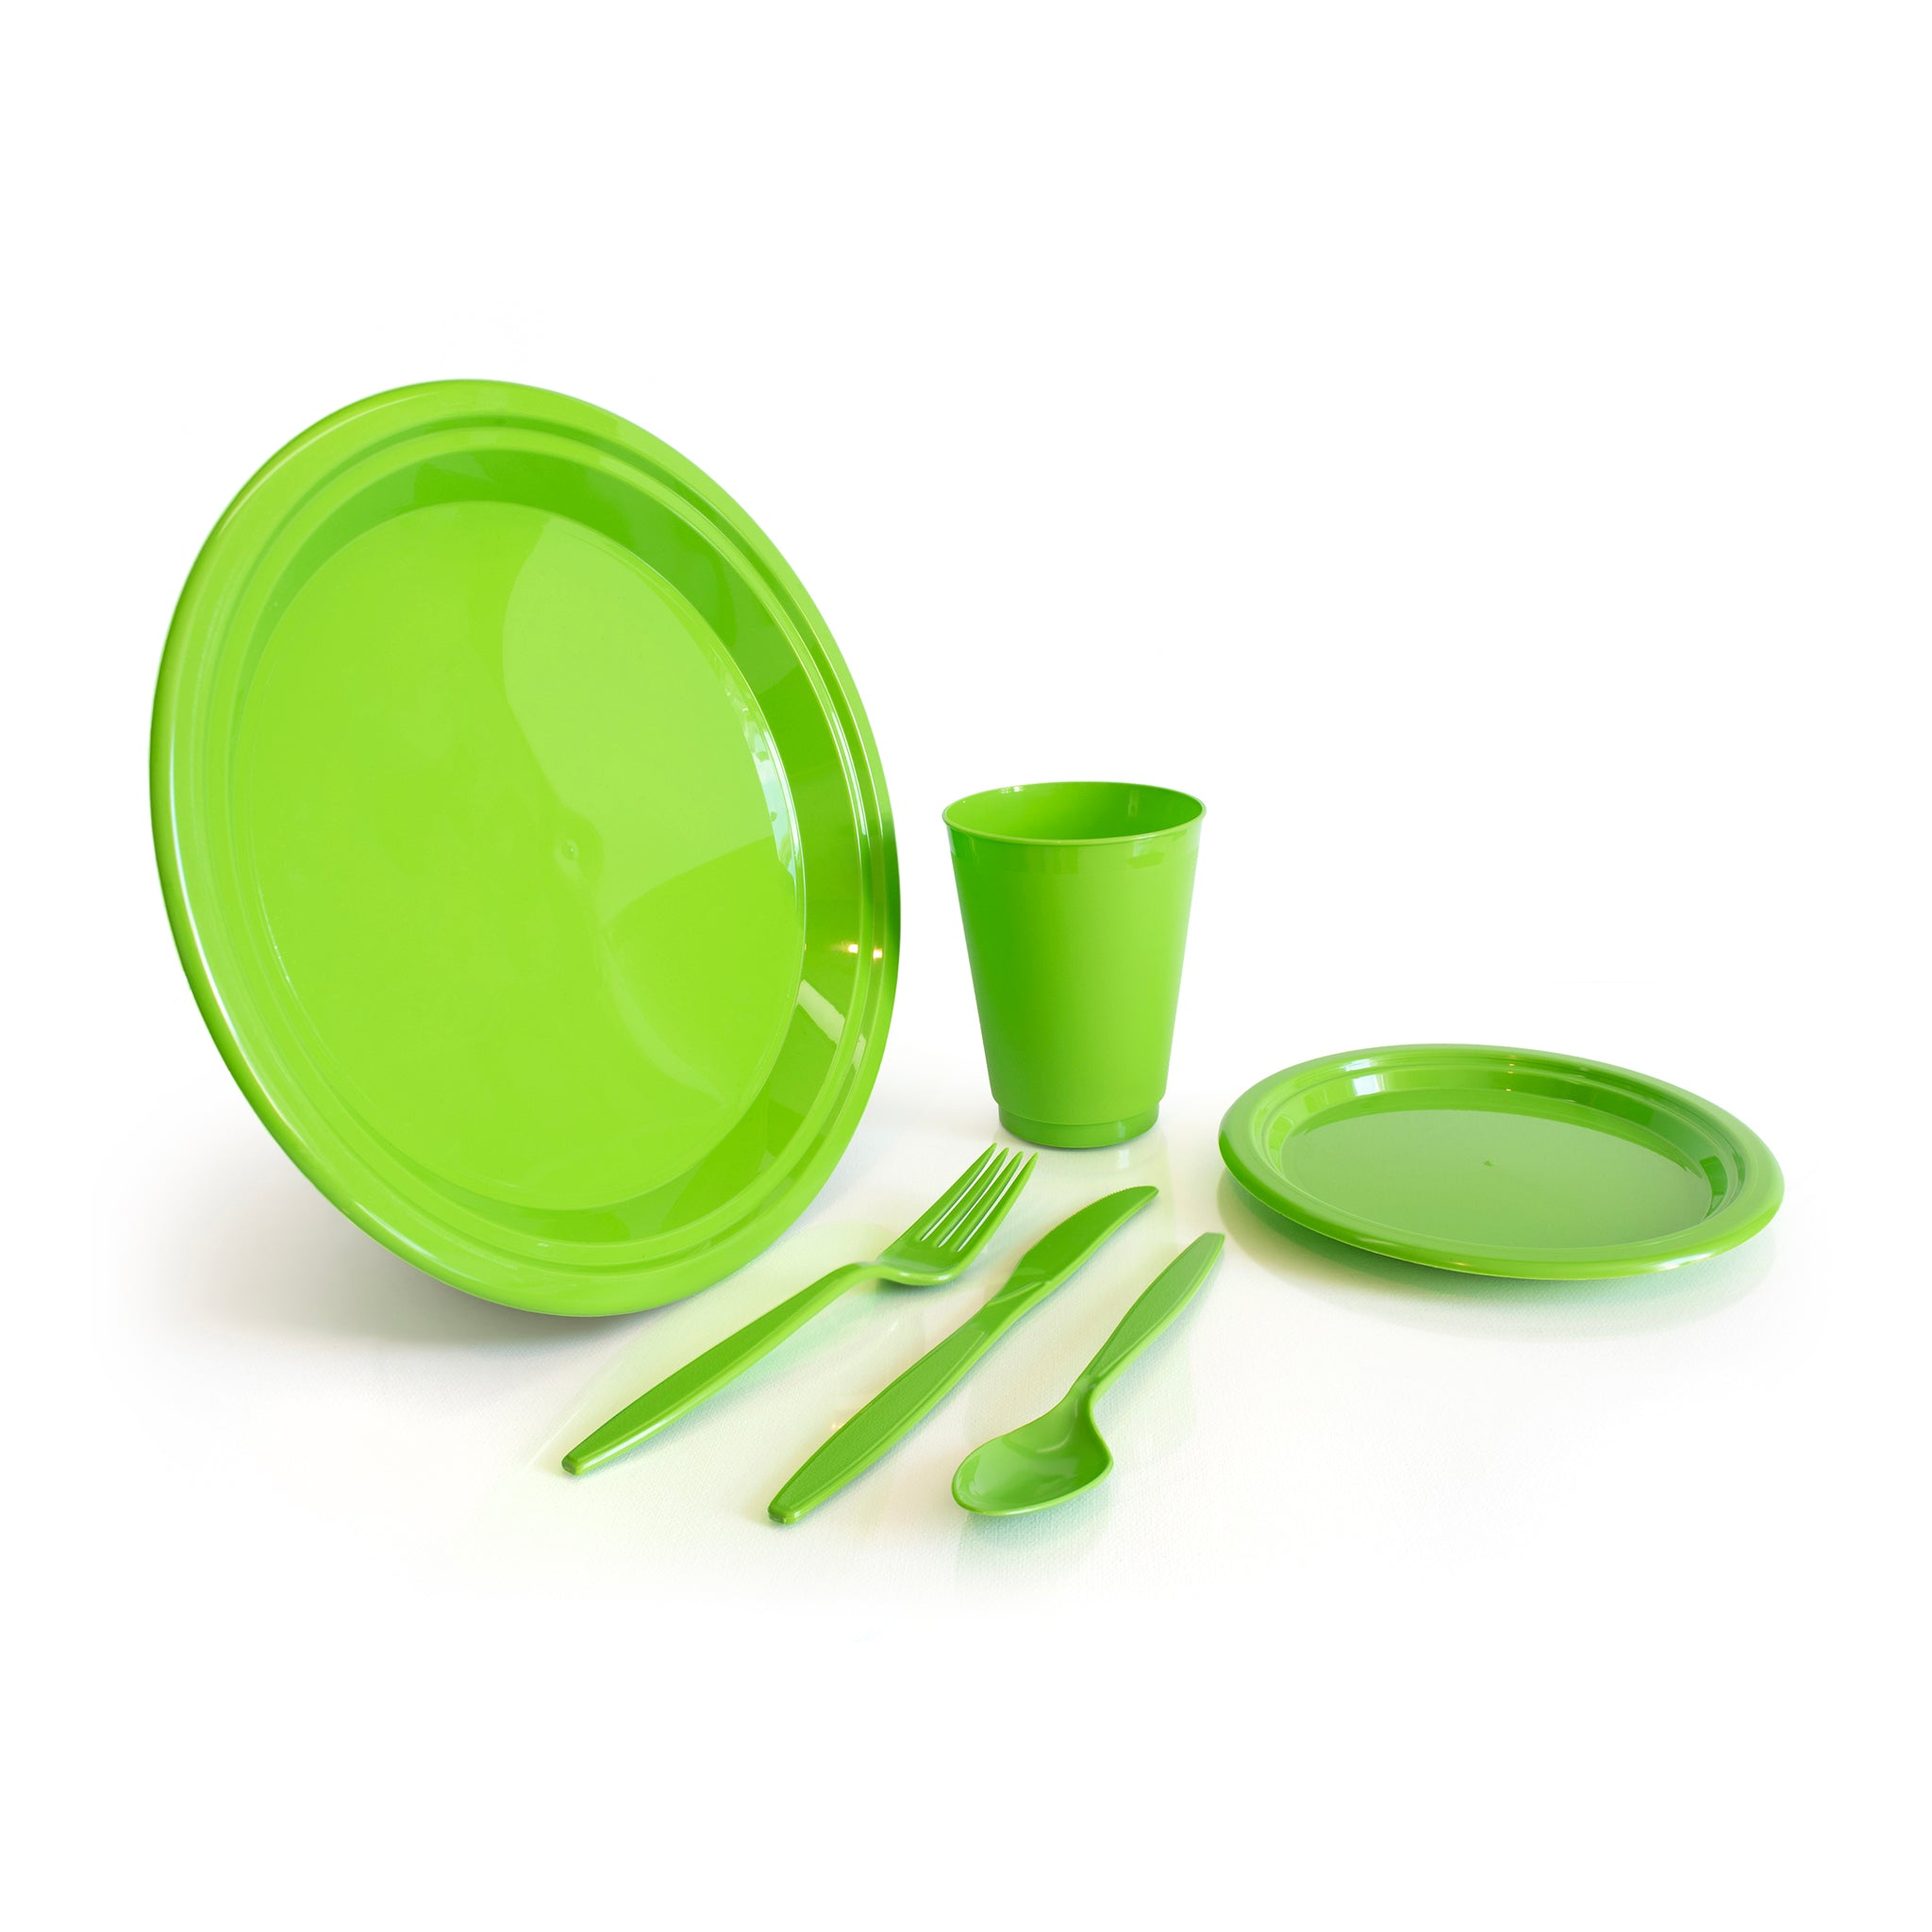 Green plastic plates, bowls and cutlery